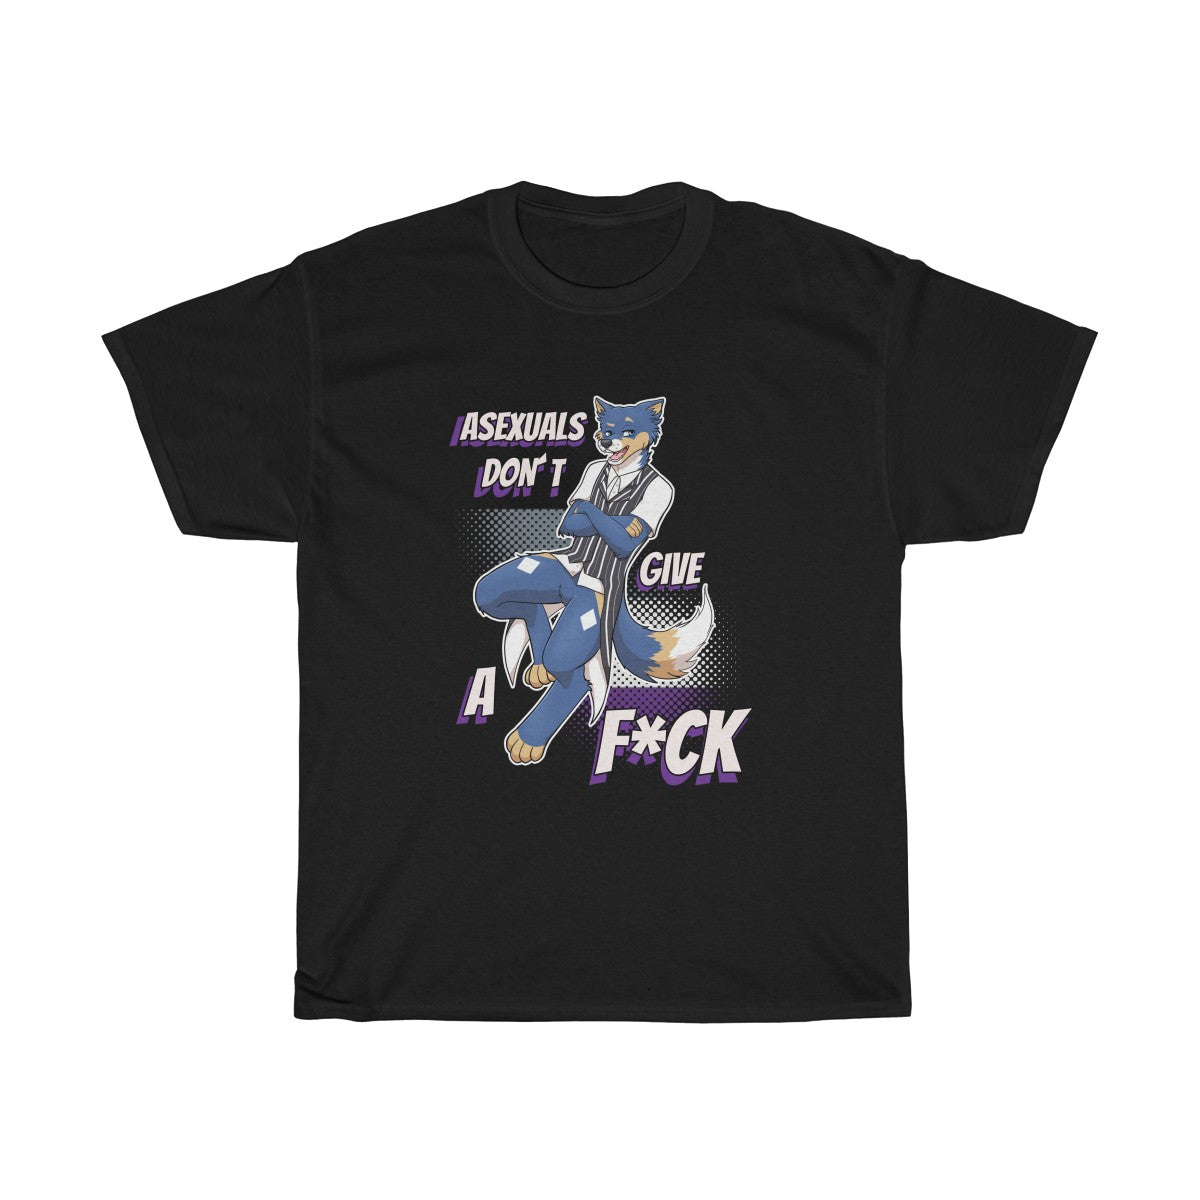 Asexual Don't Give A F*ck - T-Shirt T-Shirt Artemis Wishfoot Black S 